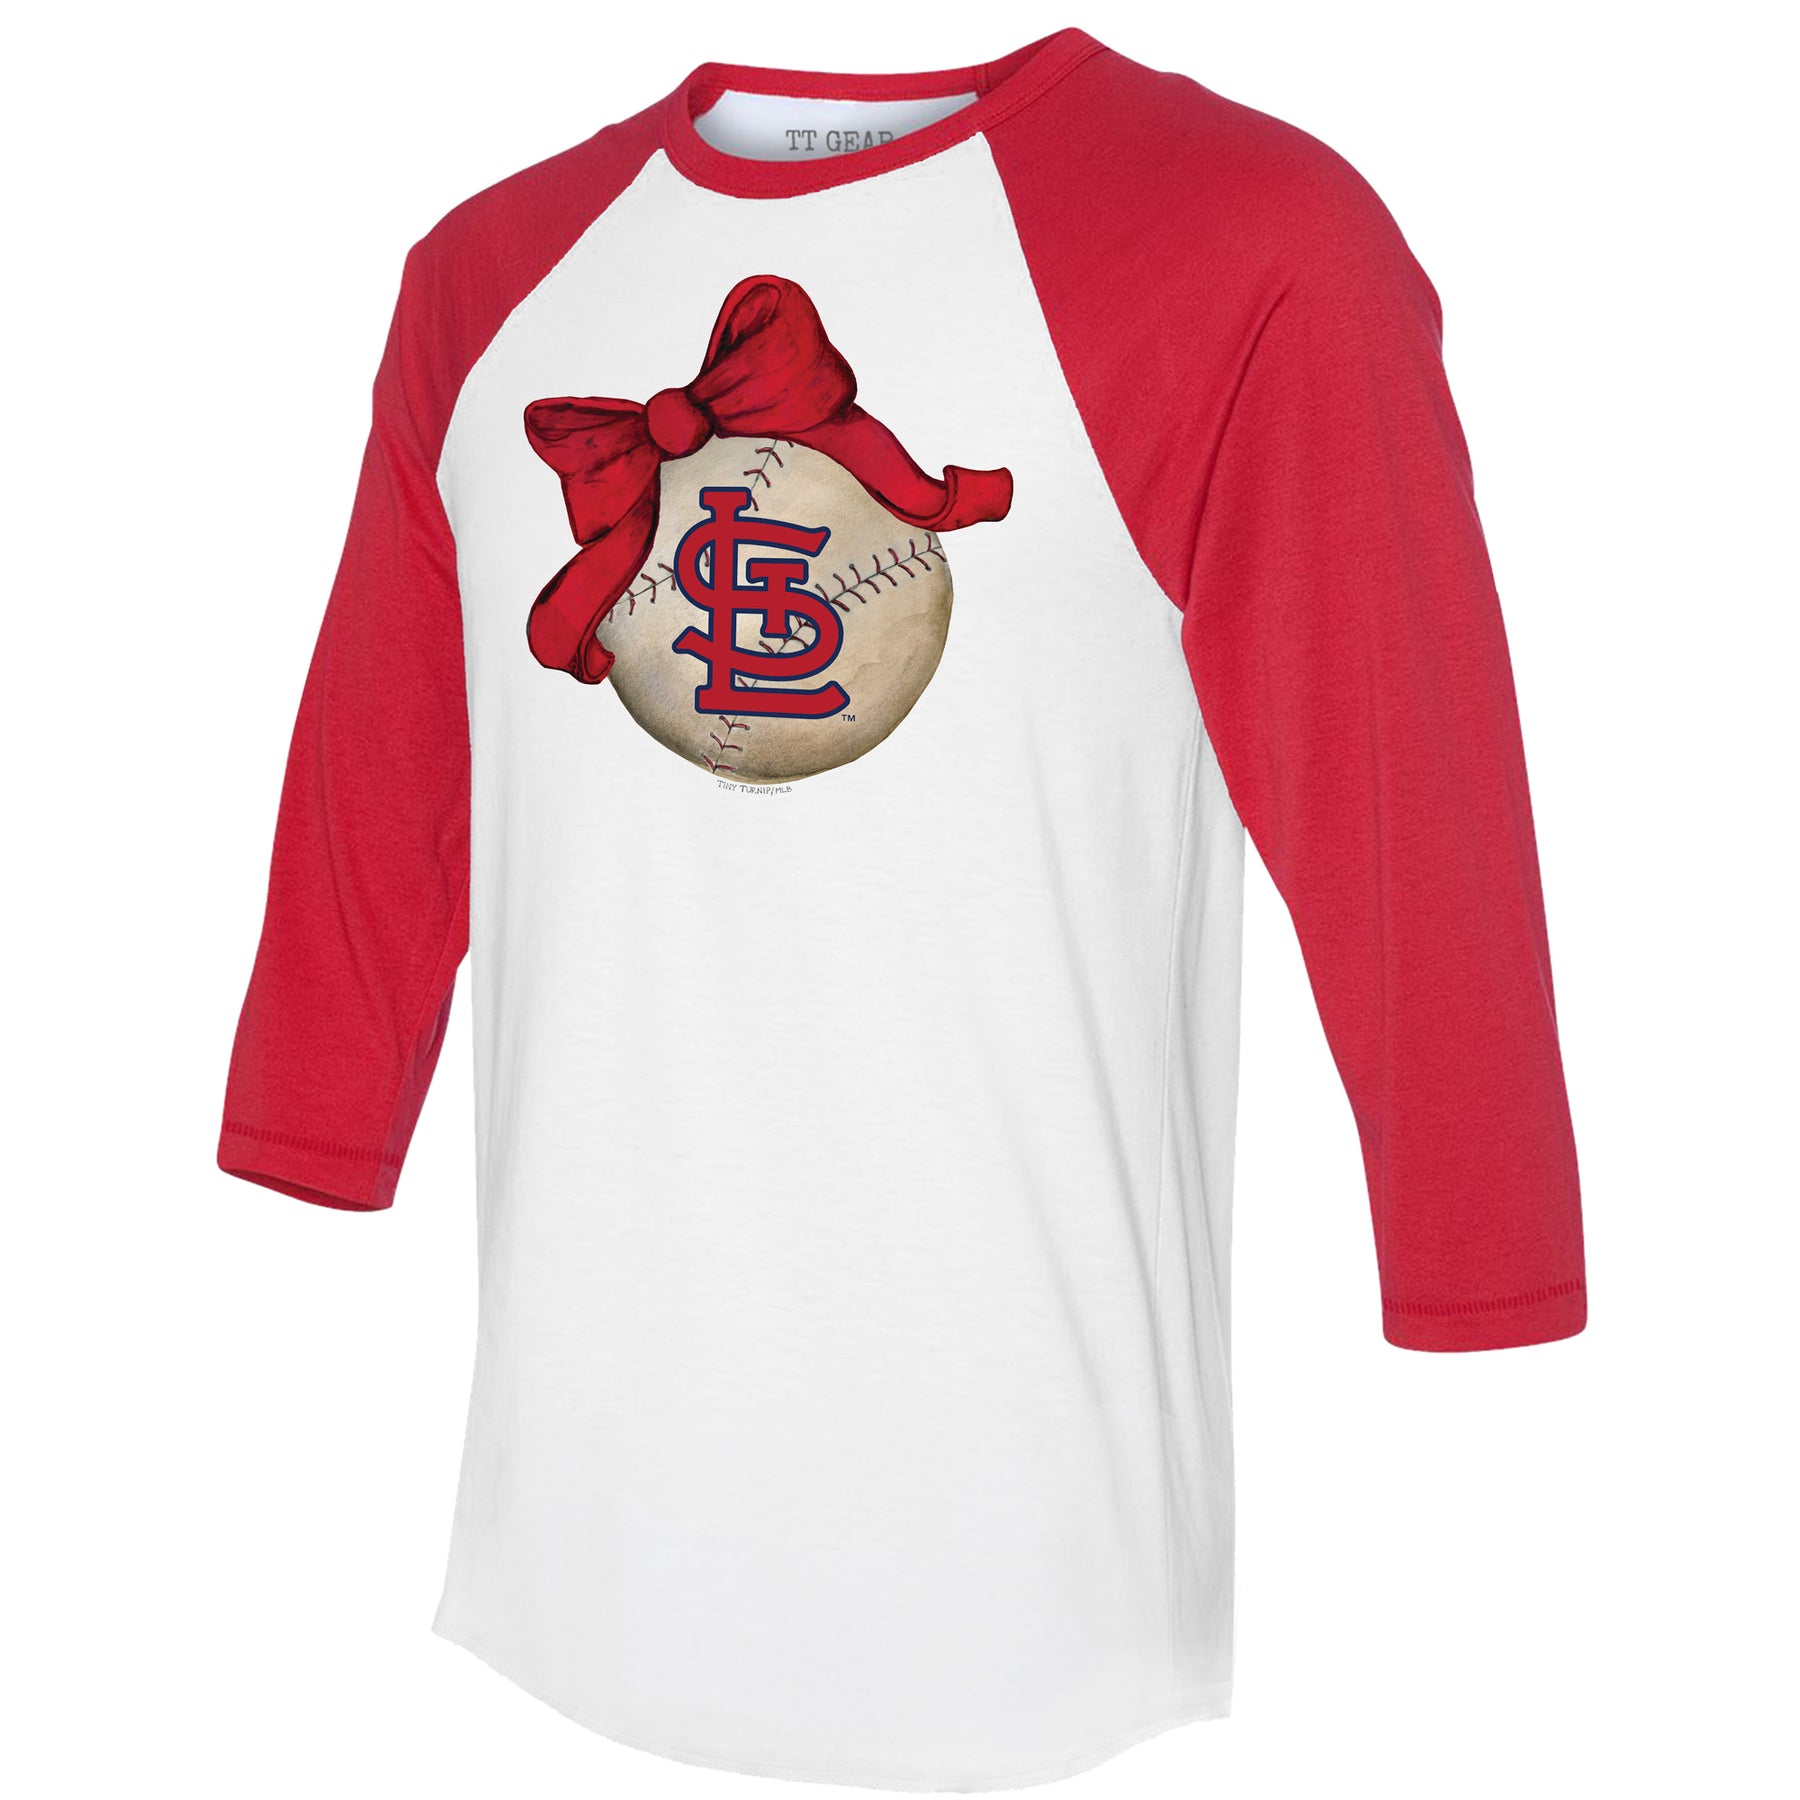 MLB St. Louis Cardinals Red And White Baseball Short Sleeve Jersey Size: 2T